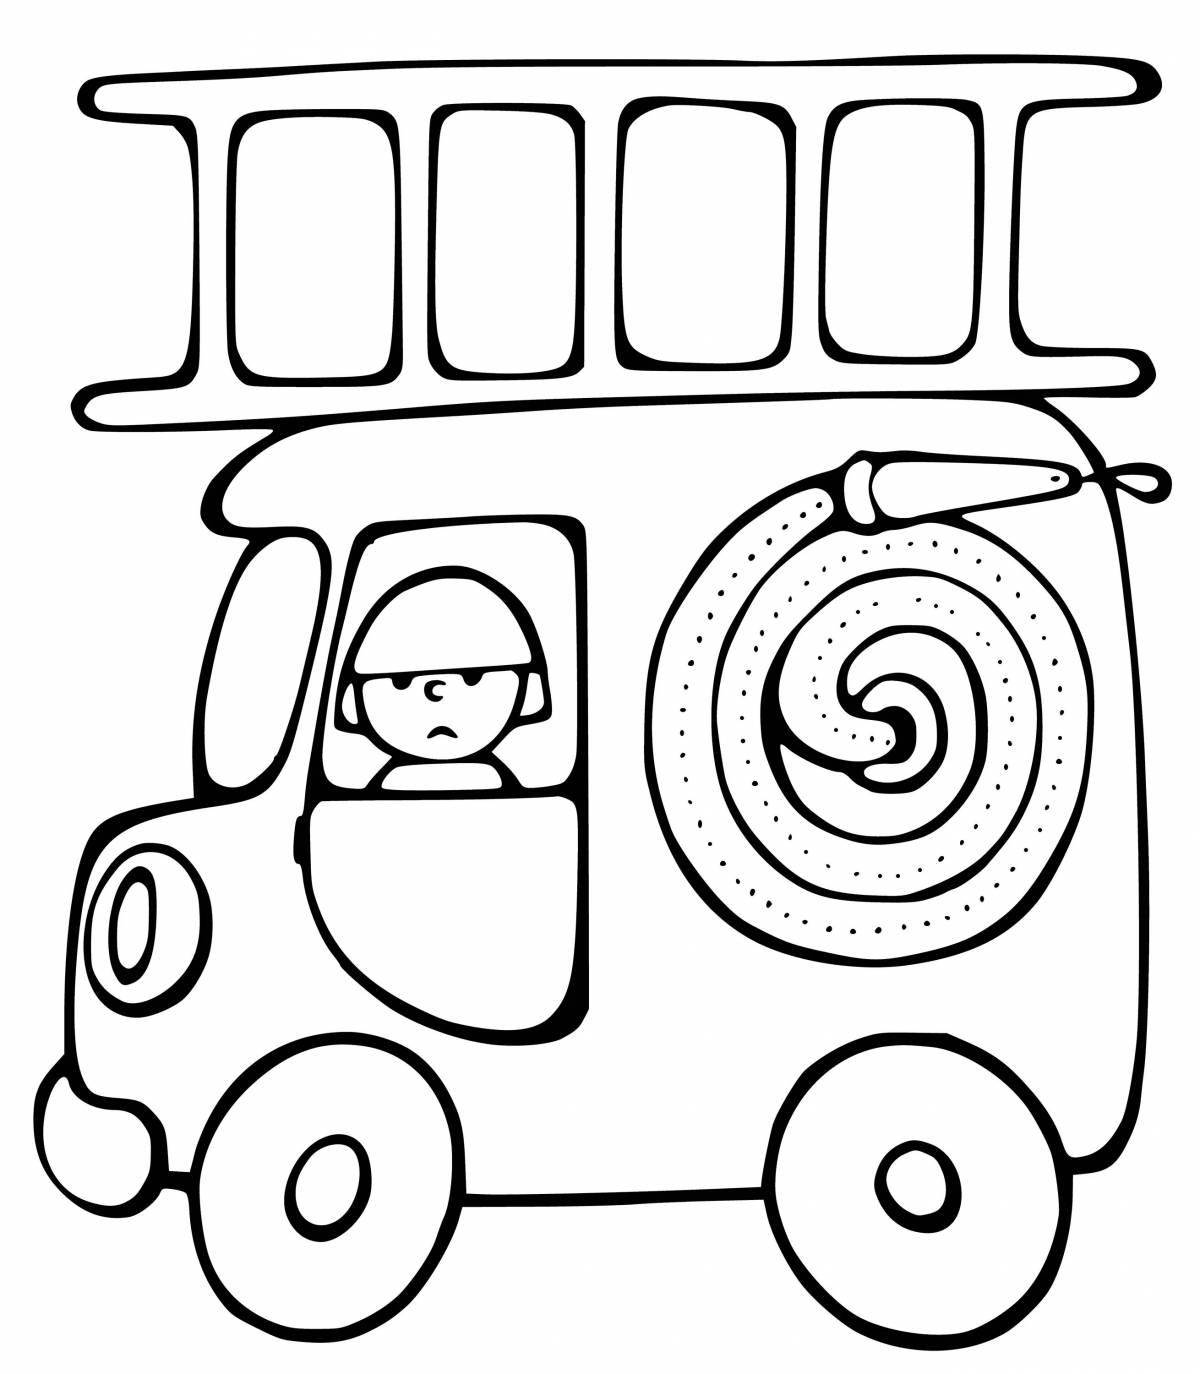 Bright transport coloring book for children 3-4 years old